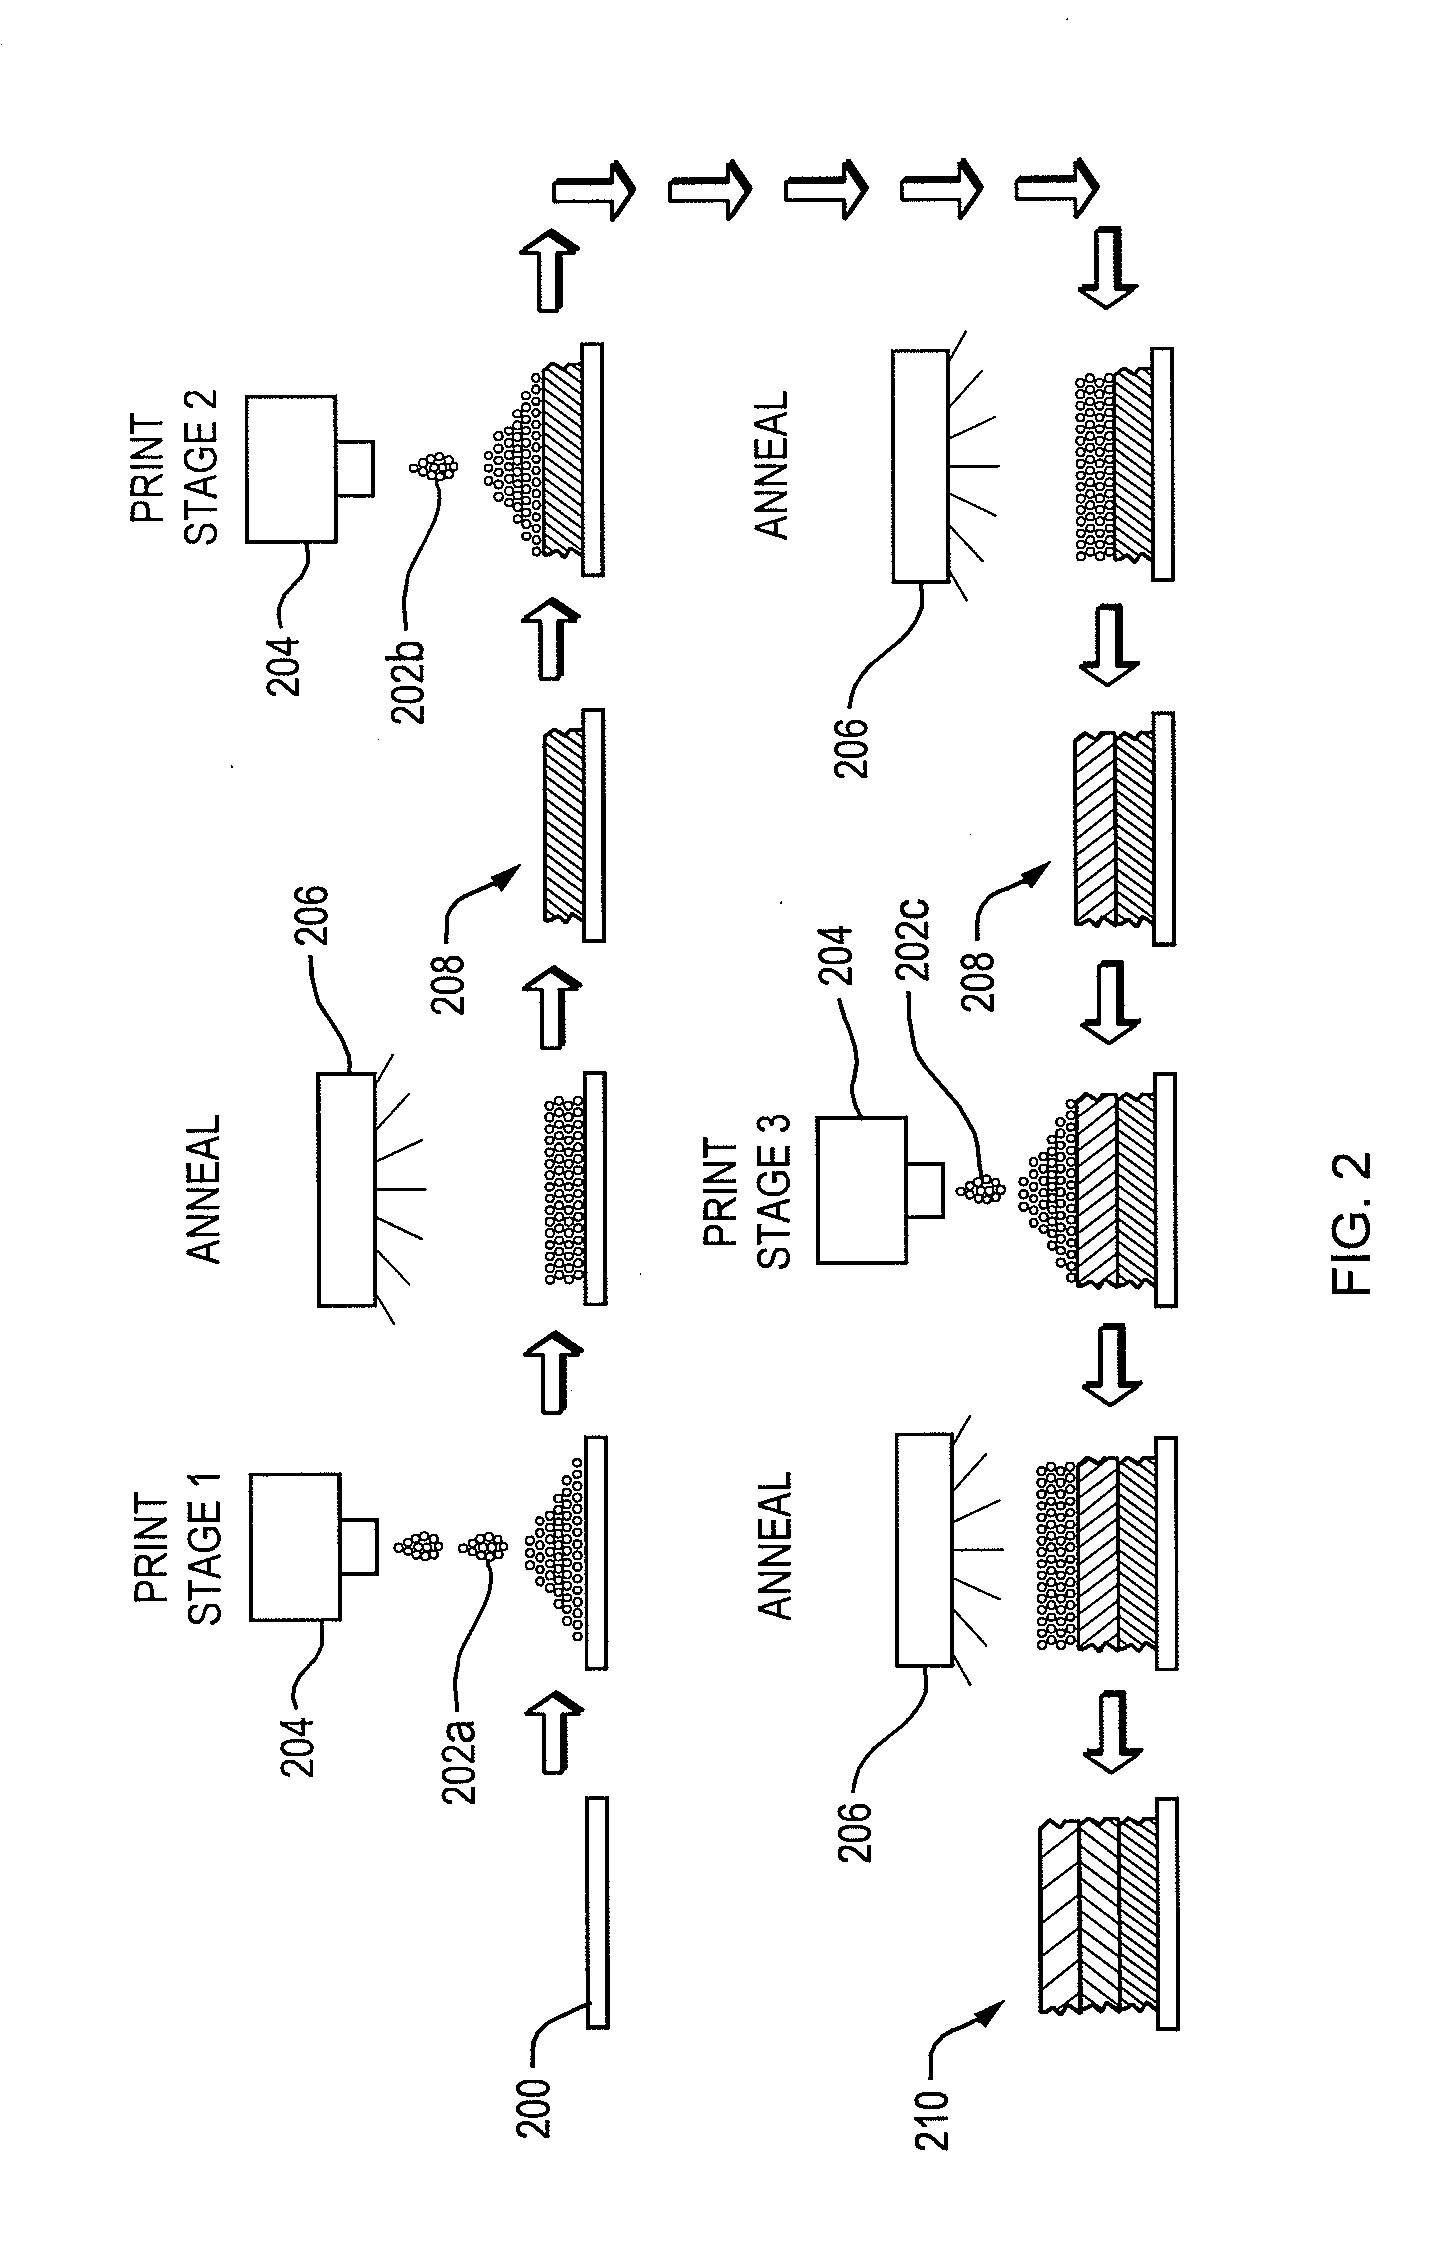 Fabrication of Electrically Active Films Based on Multiple Layers